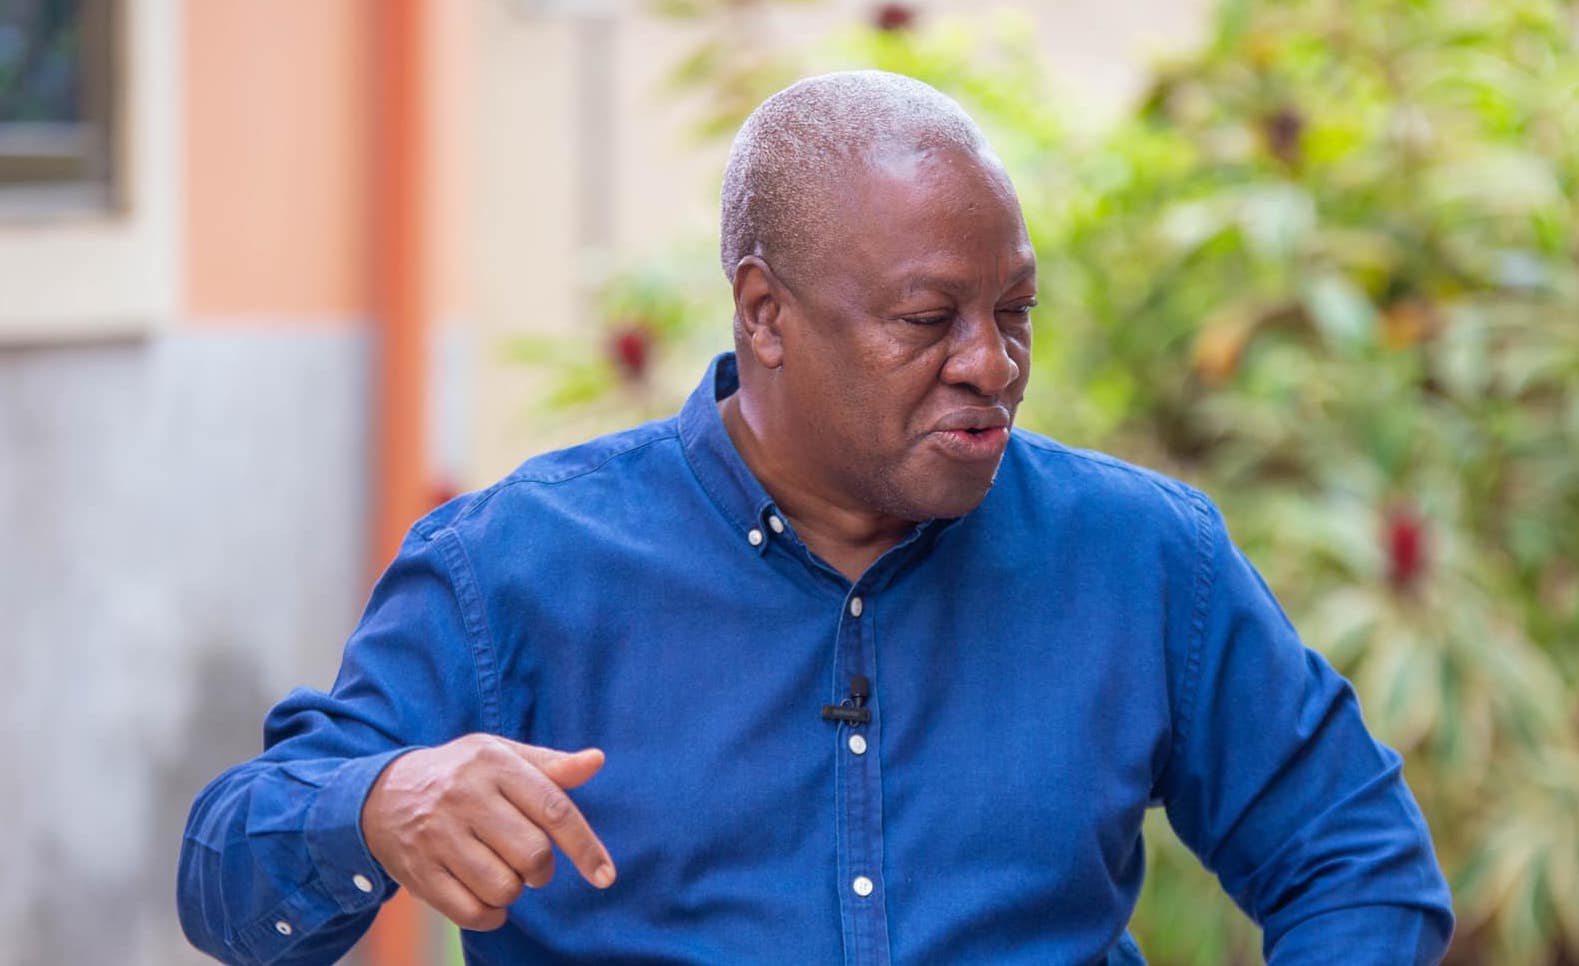 Mahama to face 2-year jail term over false passport issues